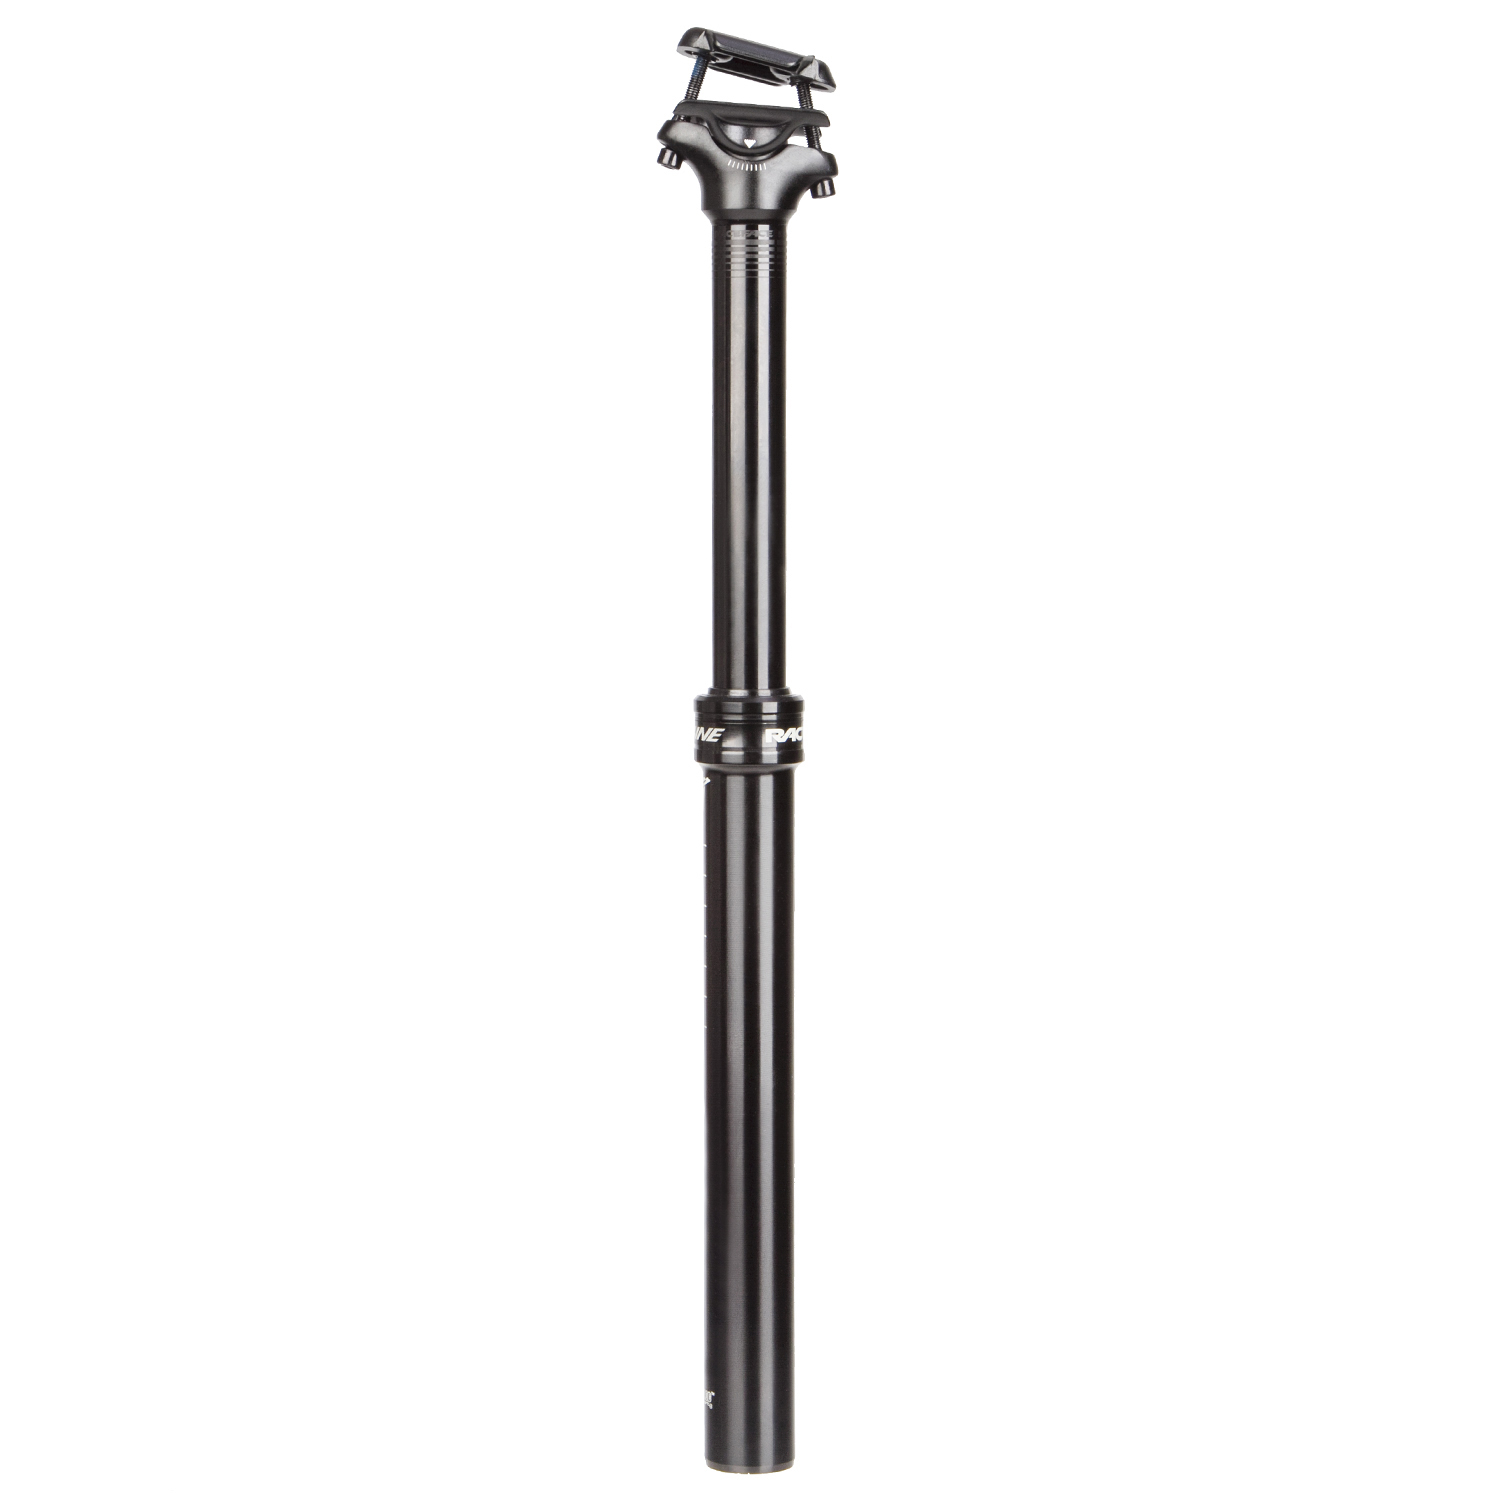 Race Face Seat Post Turbine Dropper Black, 31.6 x 375-125 mm, with Remote